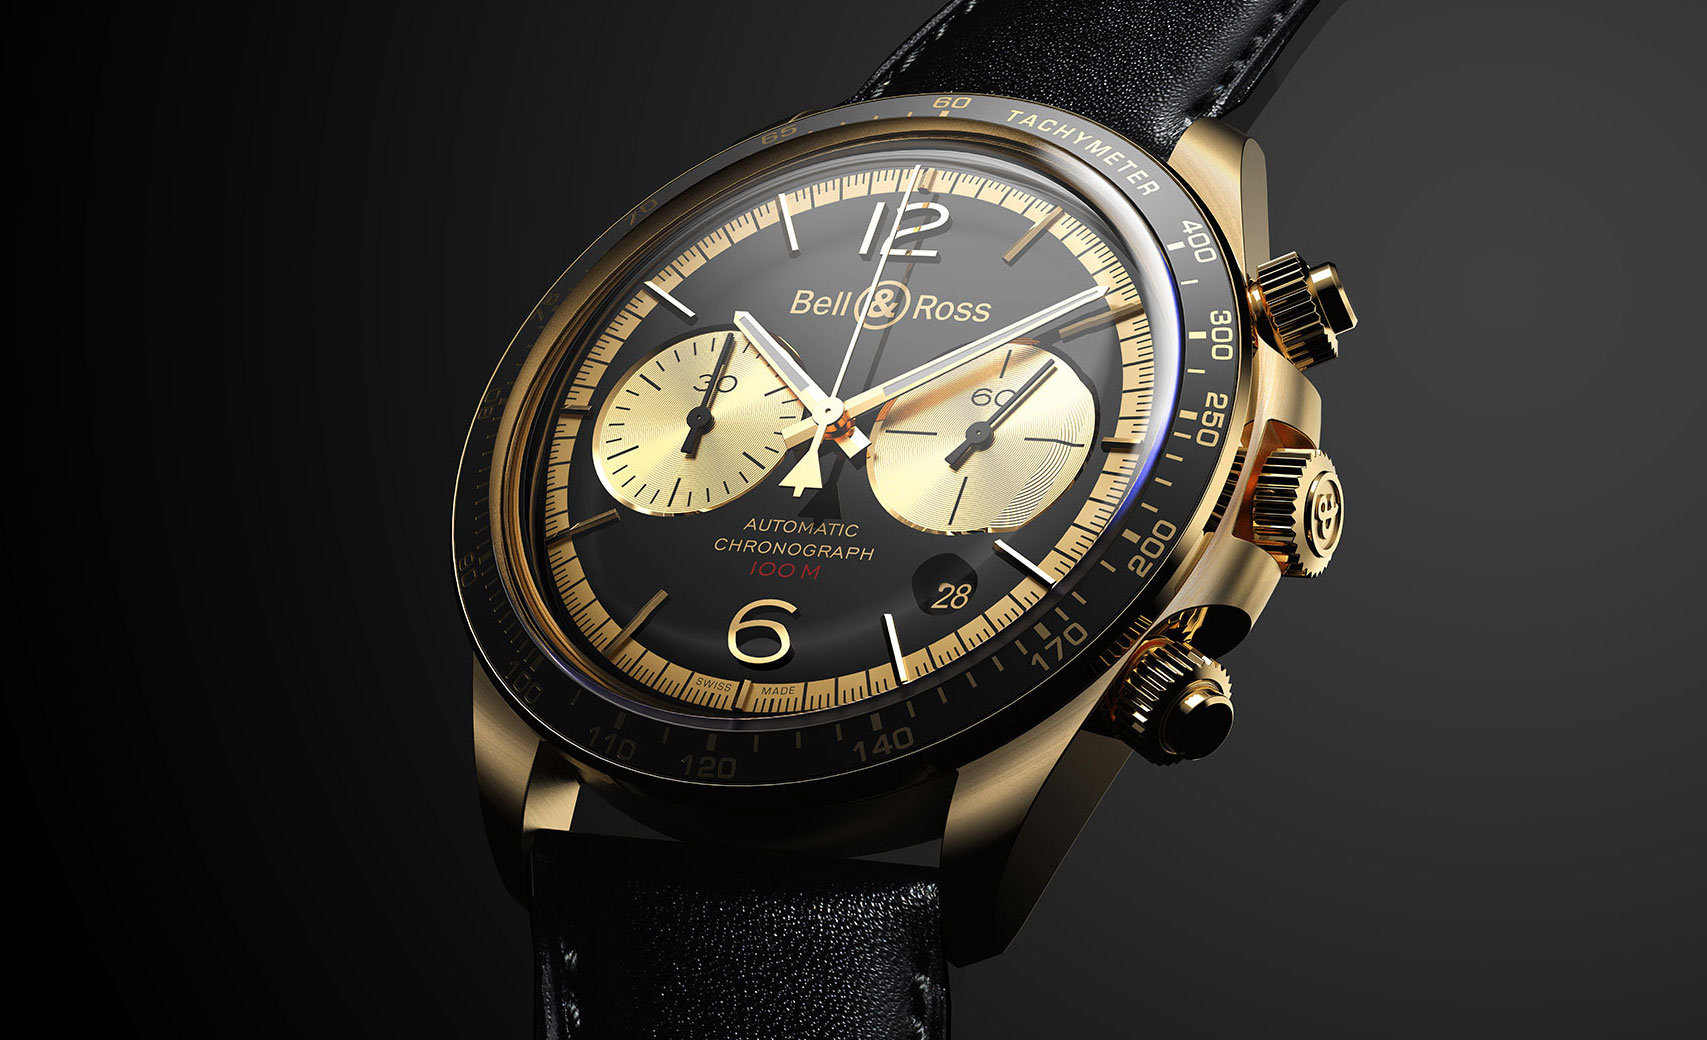 Bi-Compax Beauties: 3 great looking chronographs for the discerning timekeeper